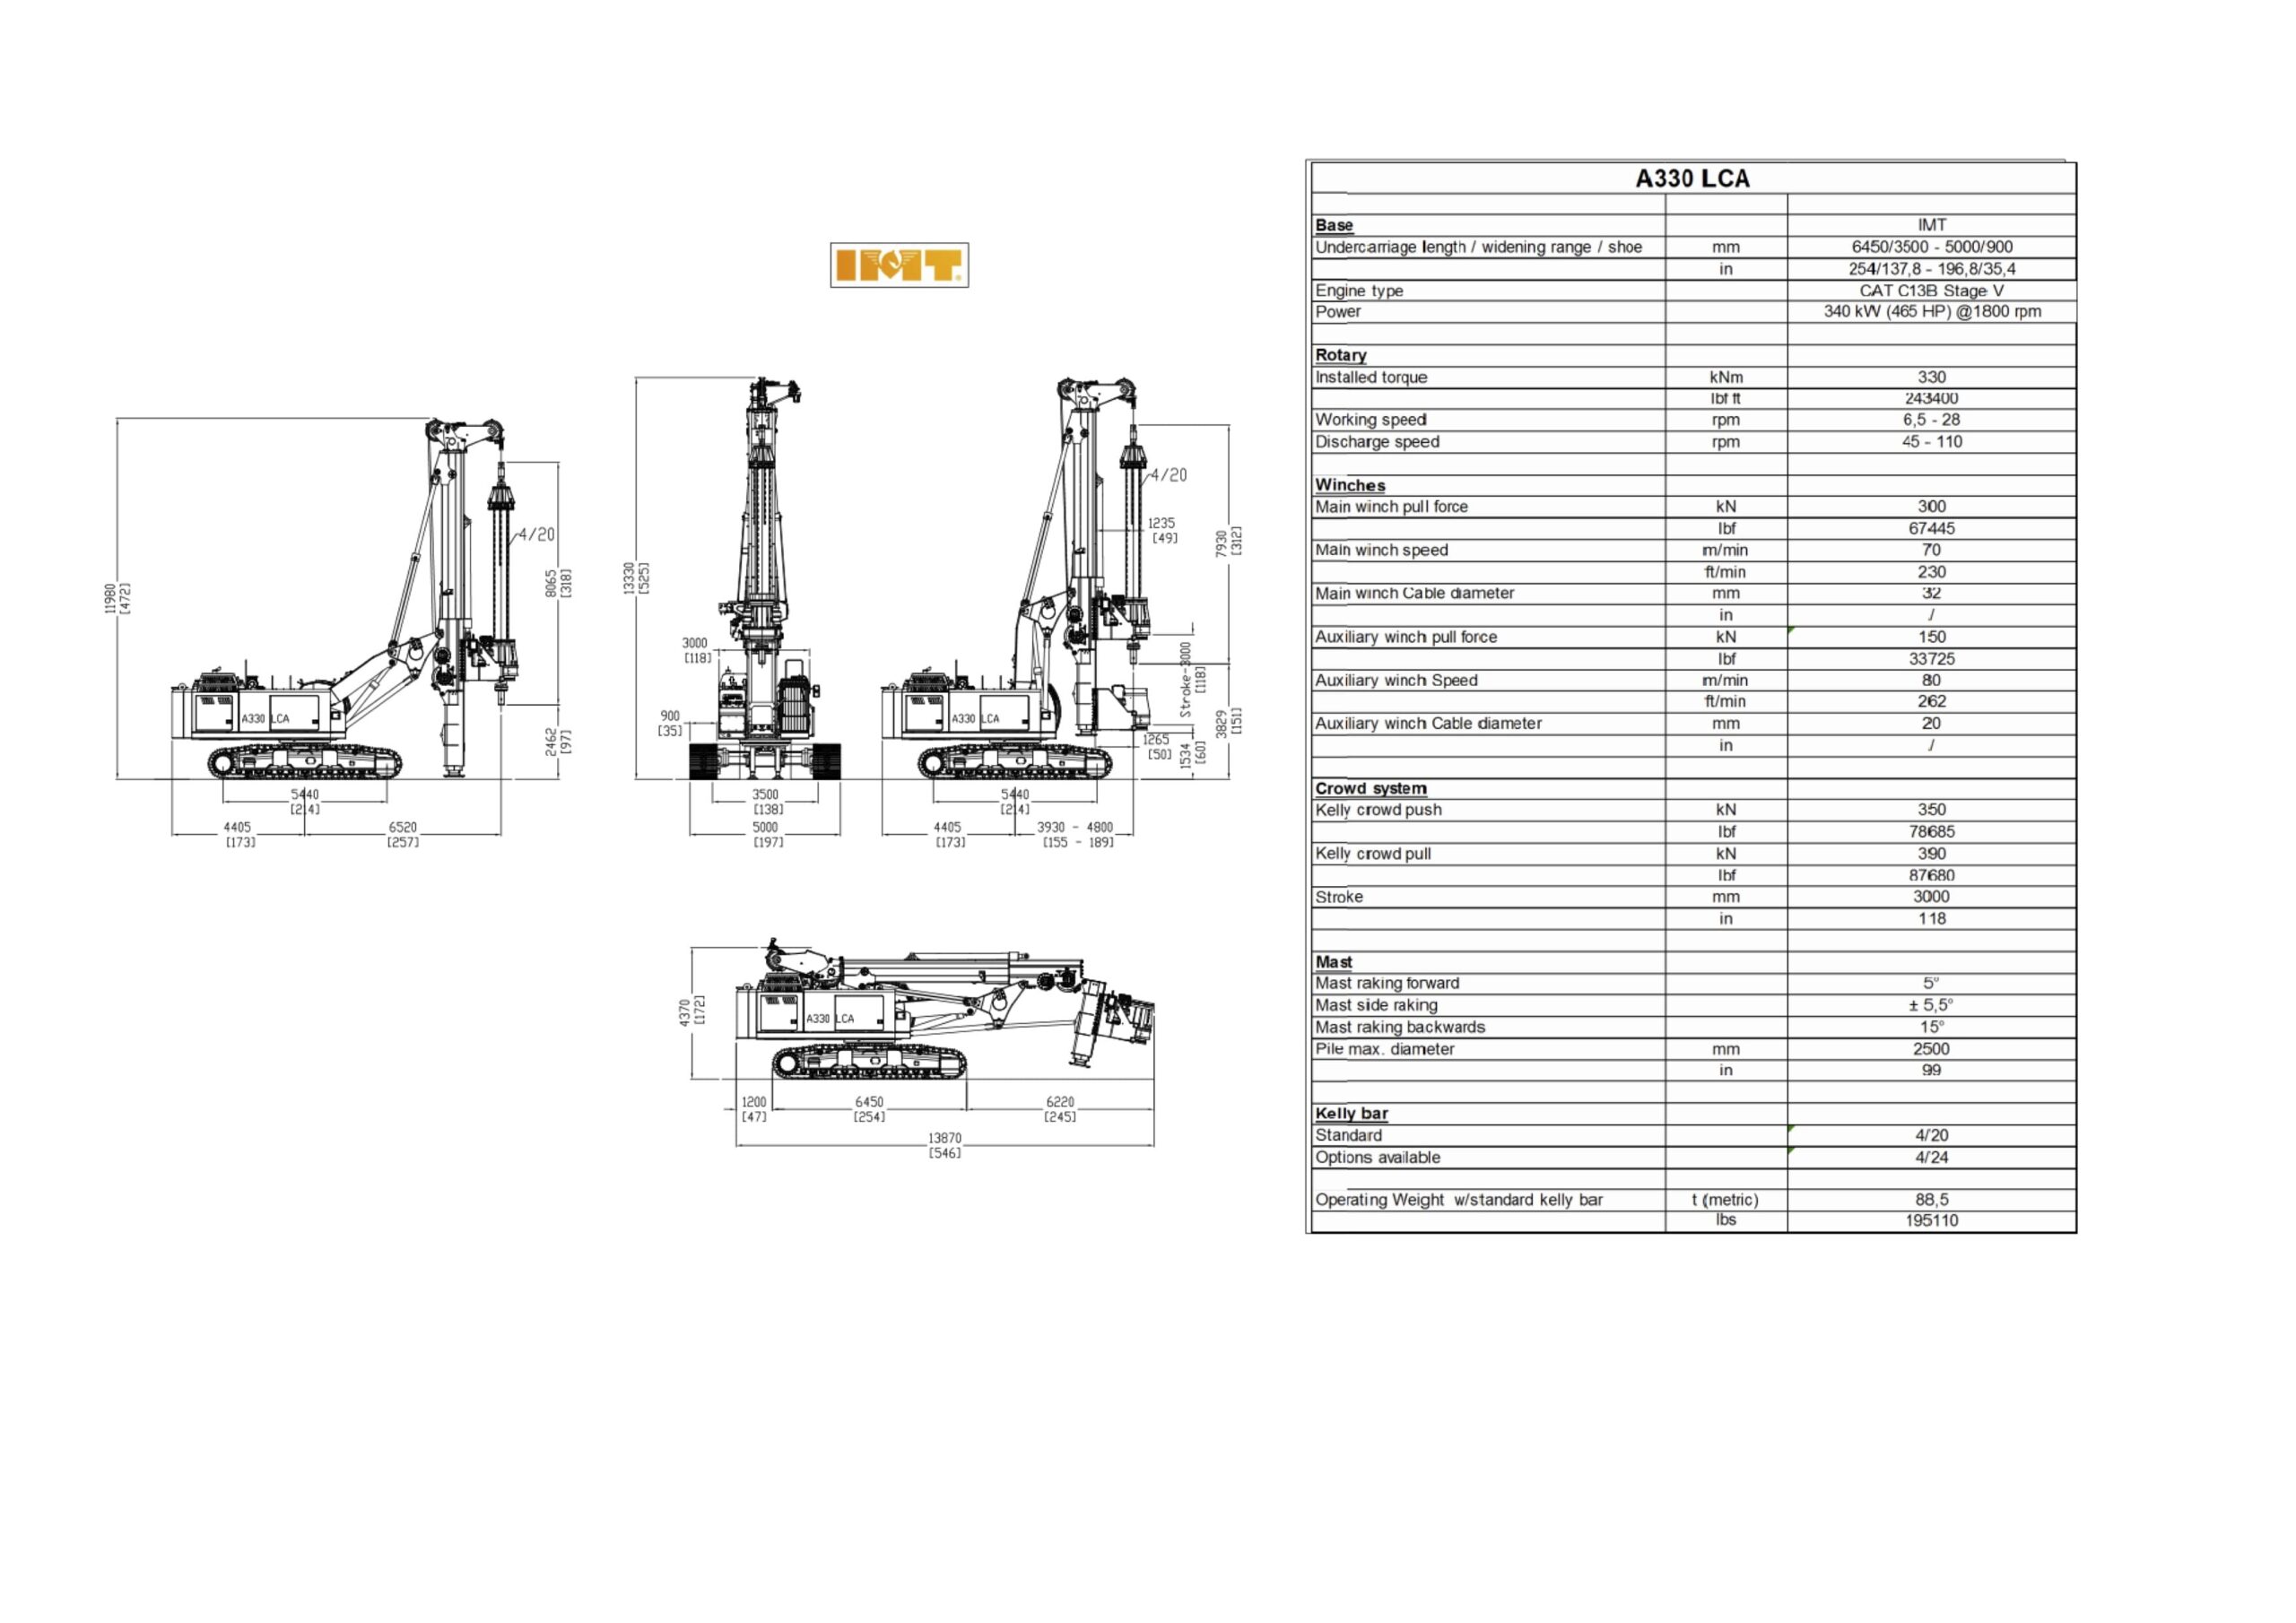 imt-industria-meccanica-trivelle-drill-piling-rigs-machines-products-A330-application-lca-version-2